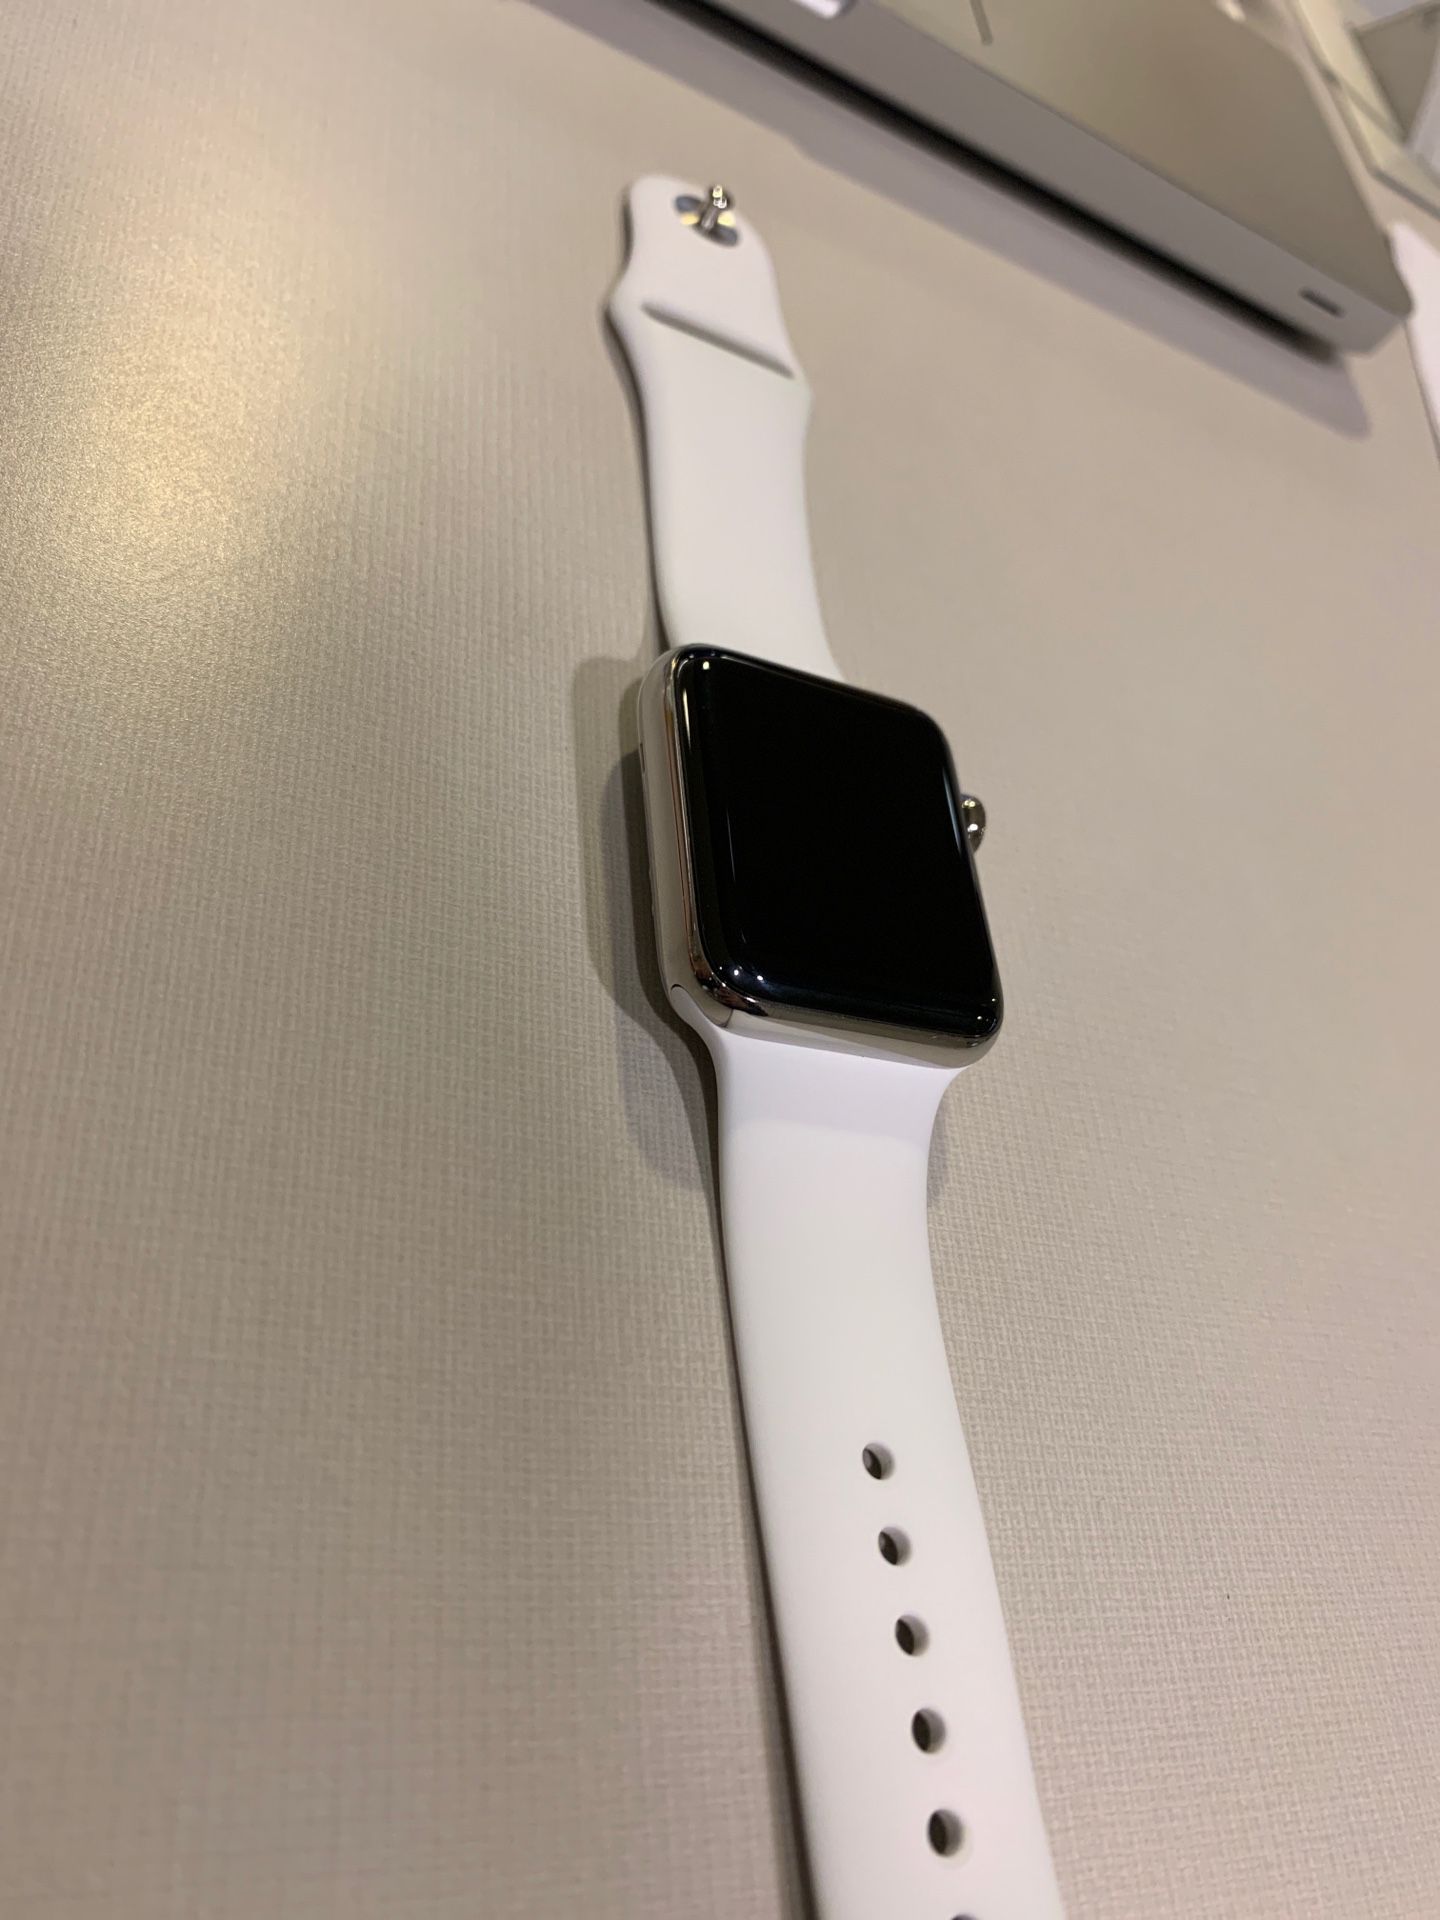 Apple Watch Stainless Steel